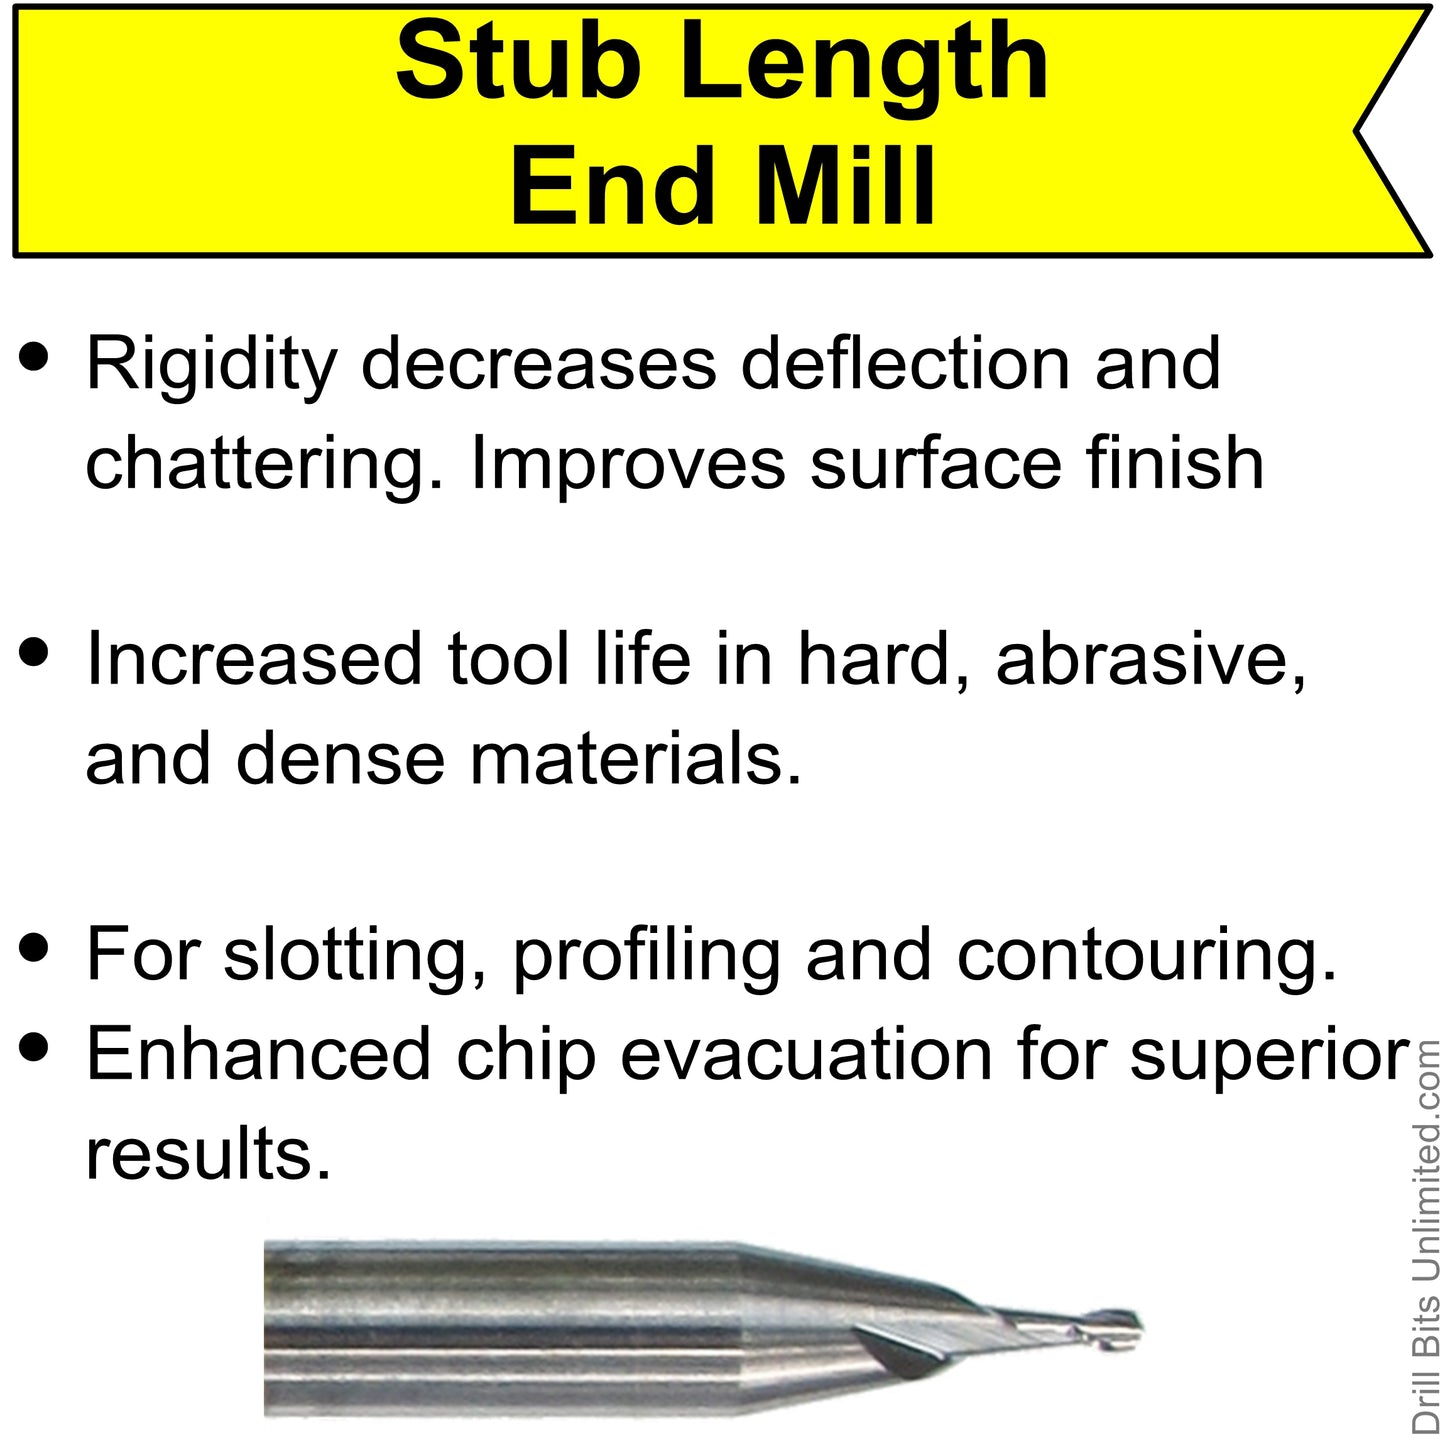 1.00mm x .060" LOC STUB length Two Flute UP Cut Carbide End Mill Square End - Made in U.S.A. M109ST